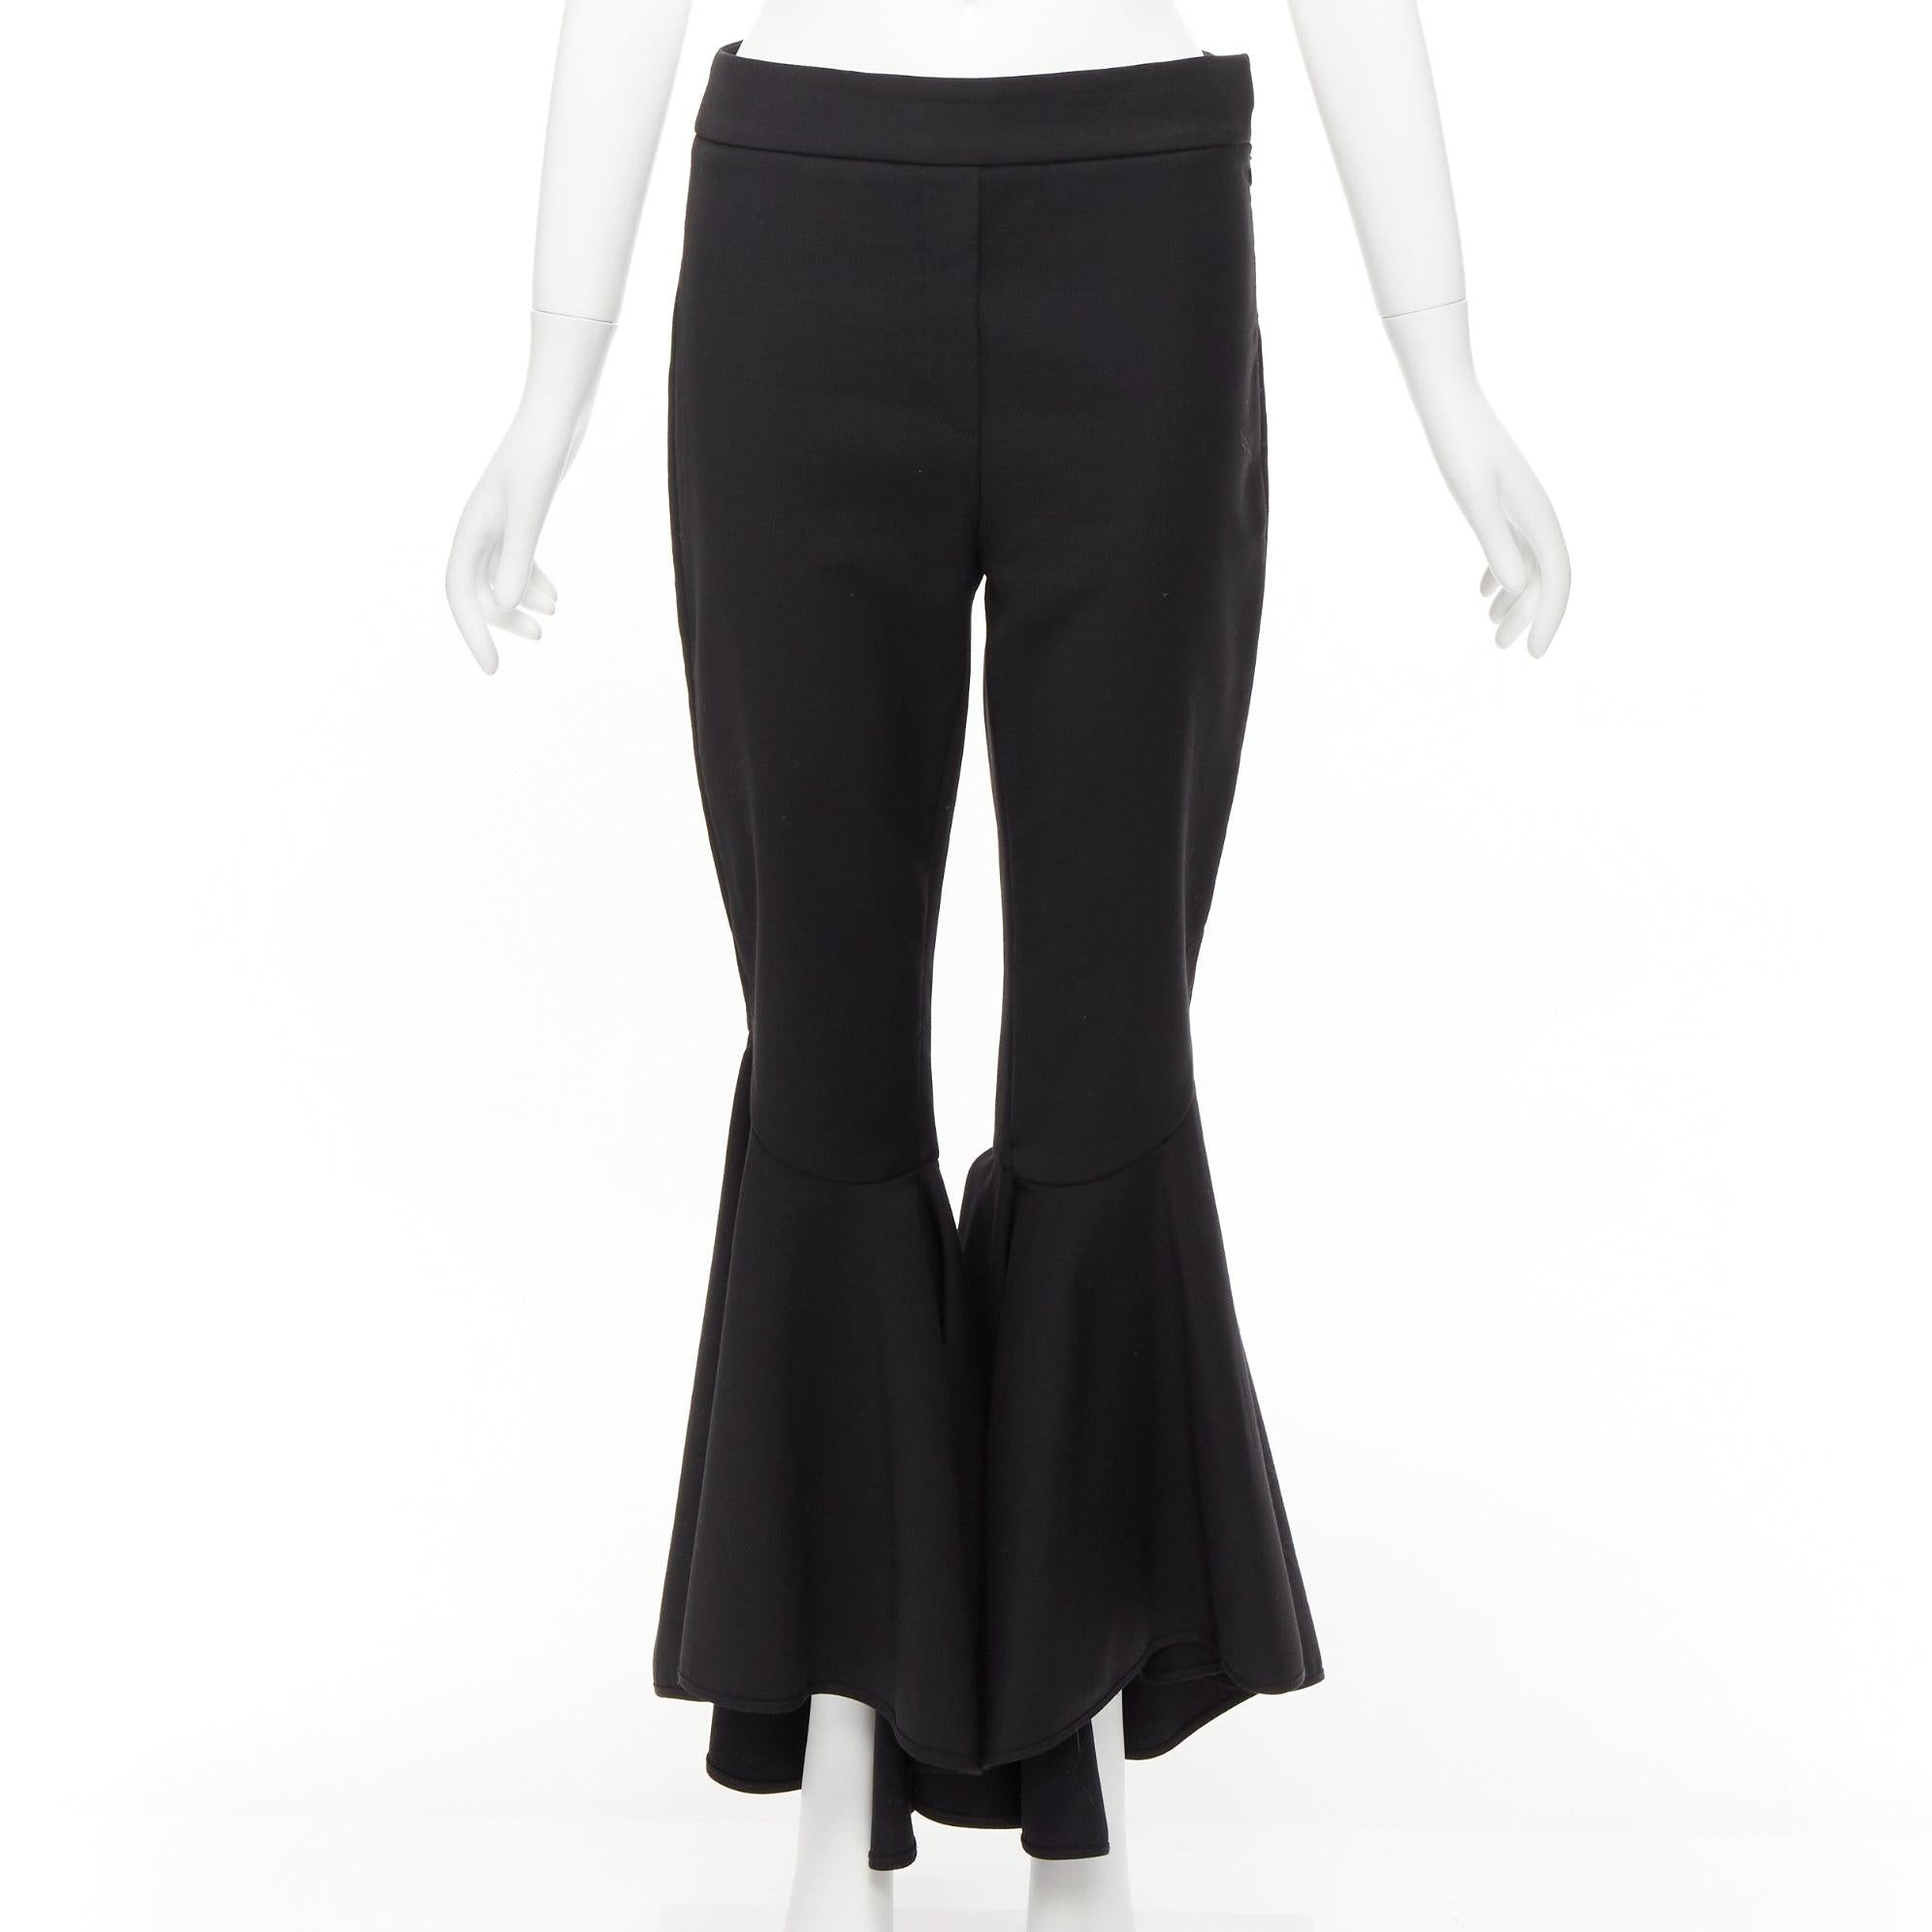 ELLERY black virgin wool blend cropped cascared flared pants US8 L
Reference: KEDG/A00283
Brand: Ellery
Material: Polyester, Virgin Wool
Color: Black
Pattern: Solid
Closure: Zip
Extra Details: Side zip.
Made in: Australia

CONDITION:
Condition: